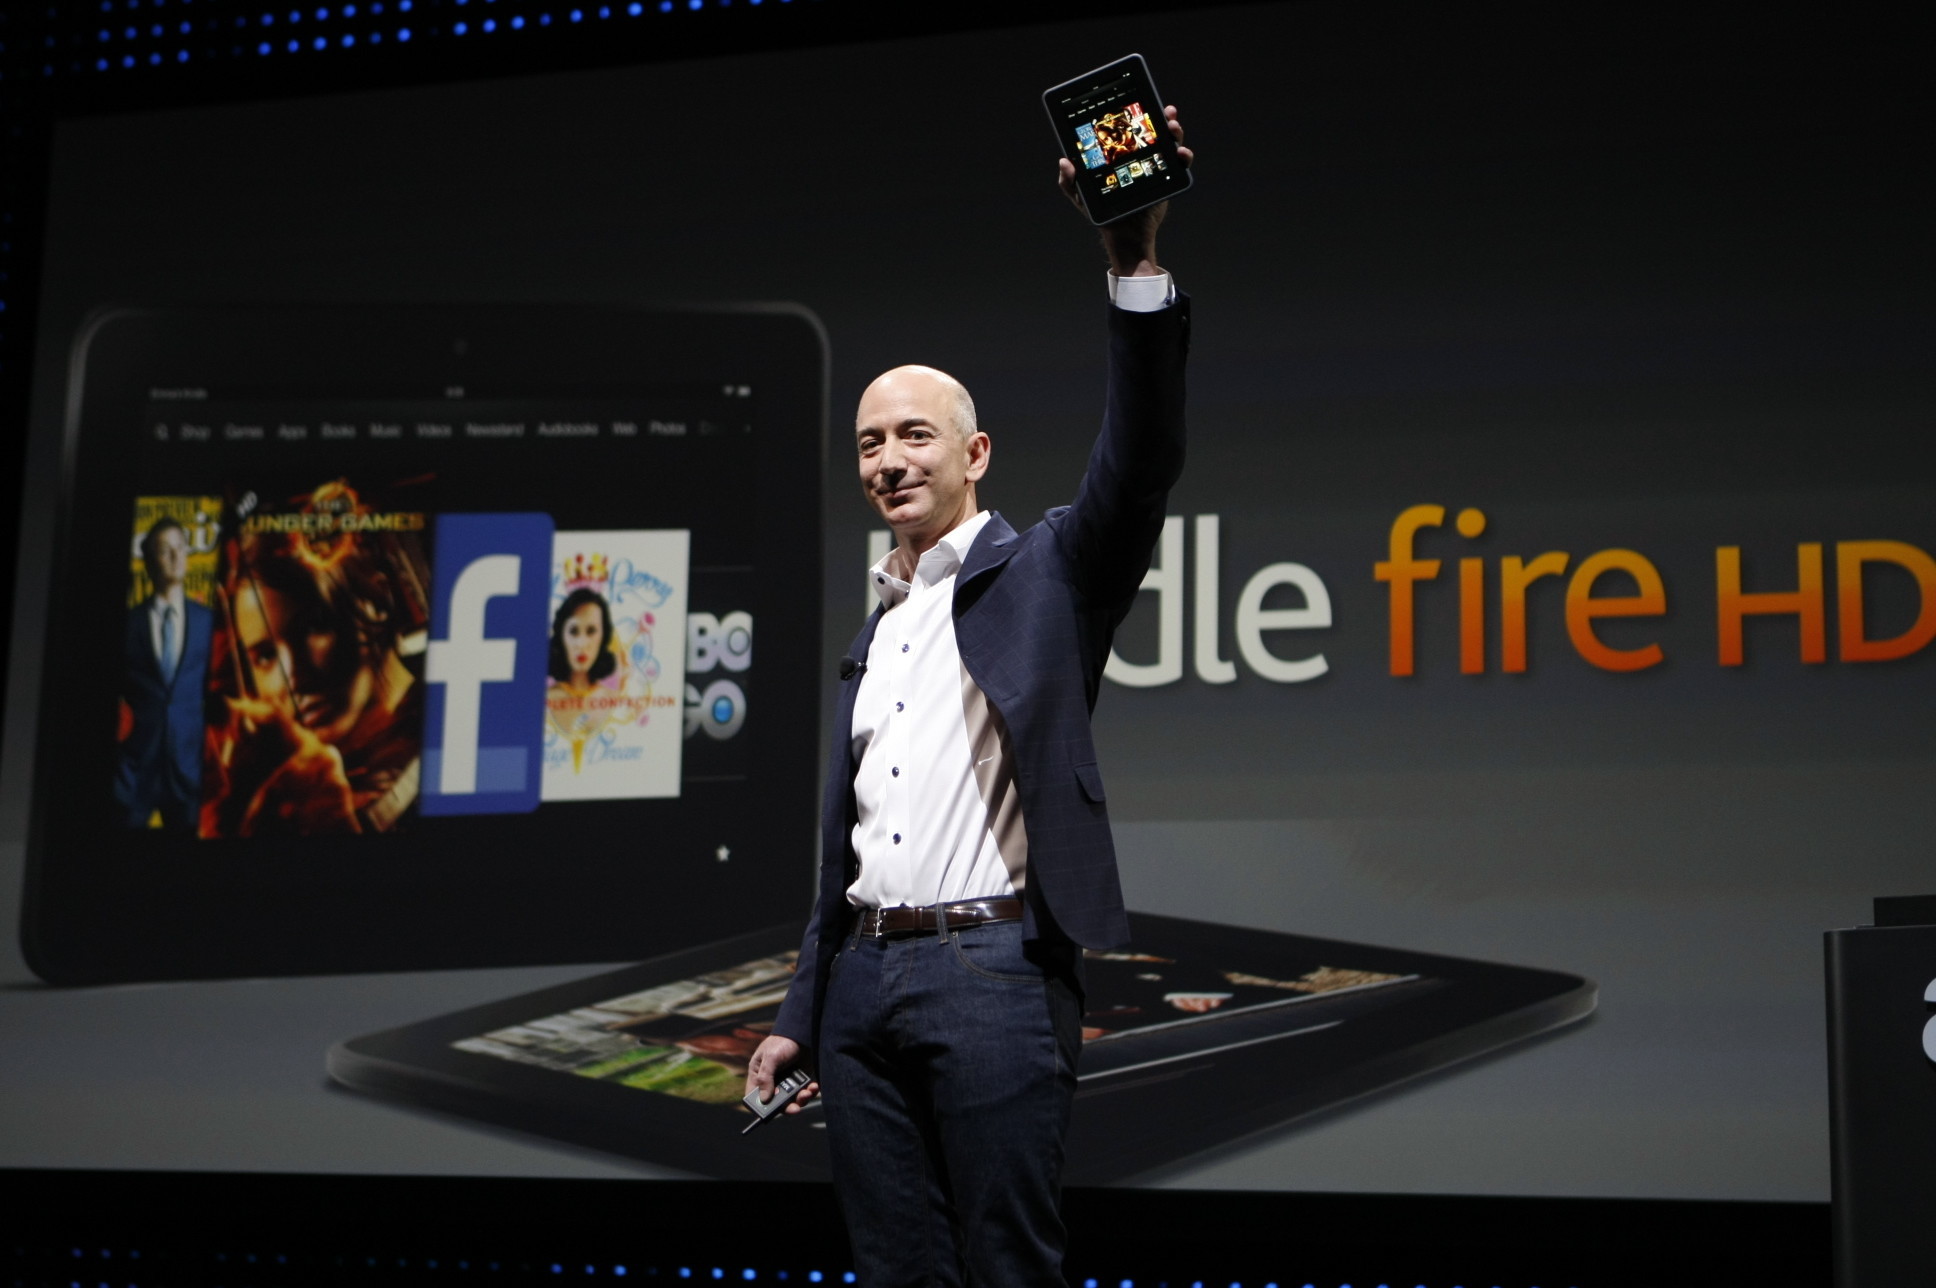 Amazon CEO Jeff Bezos unveils the Kindle Fire HD in 2012.